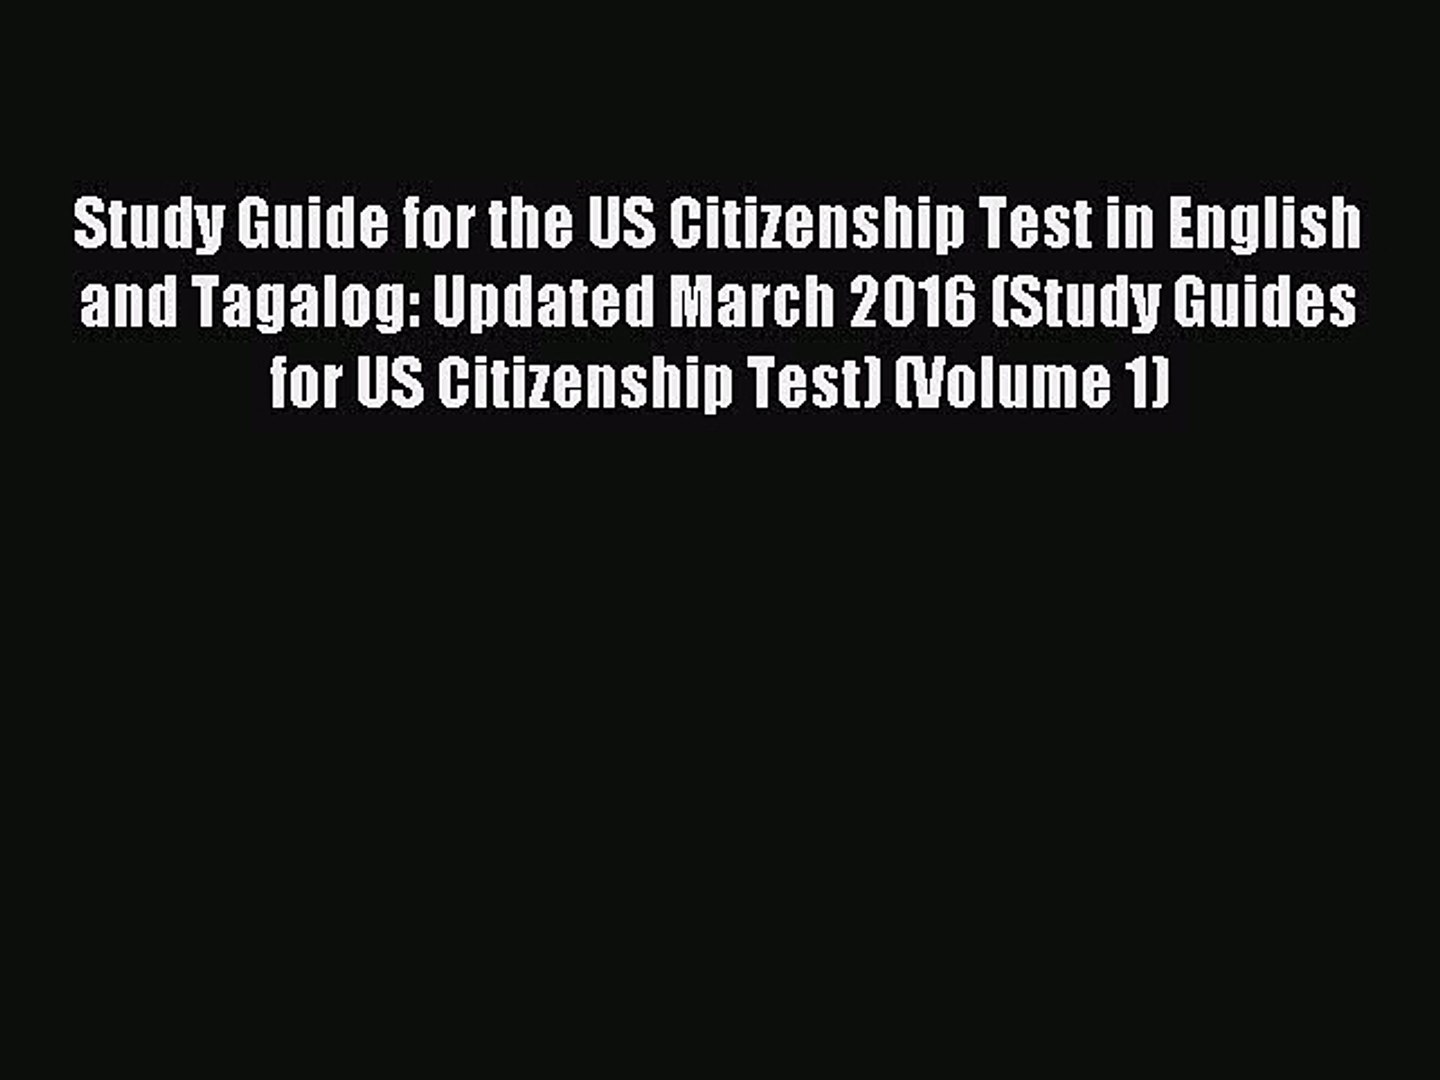 Read Study Guide for the US Citizenship Test in English and Tagalog: Updated March 2016 (Study